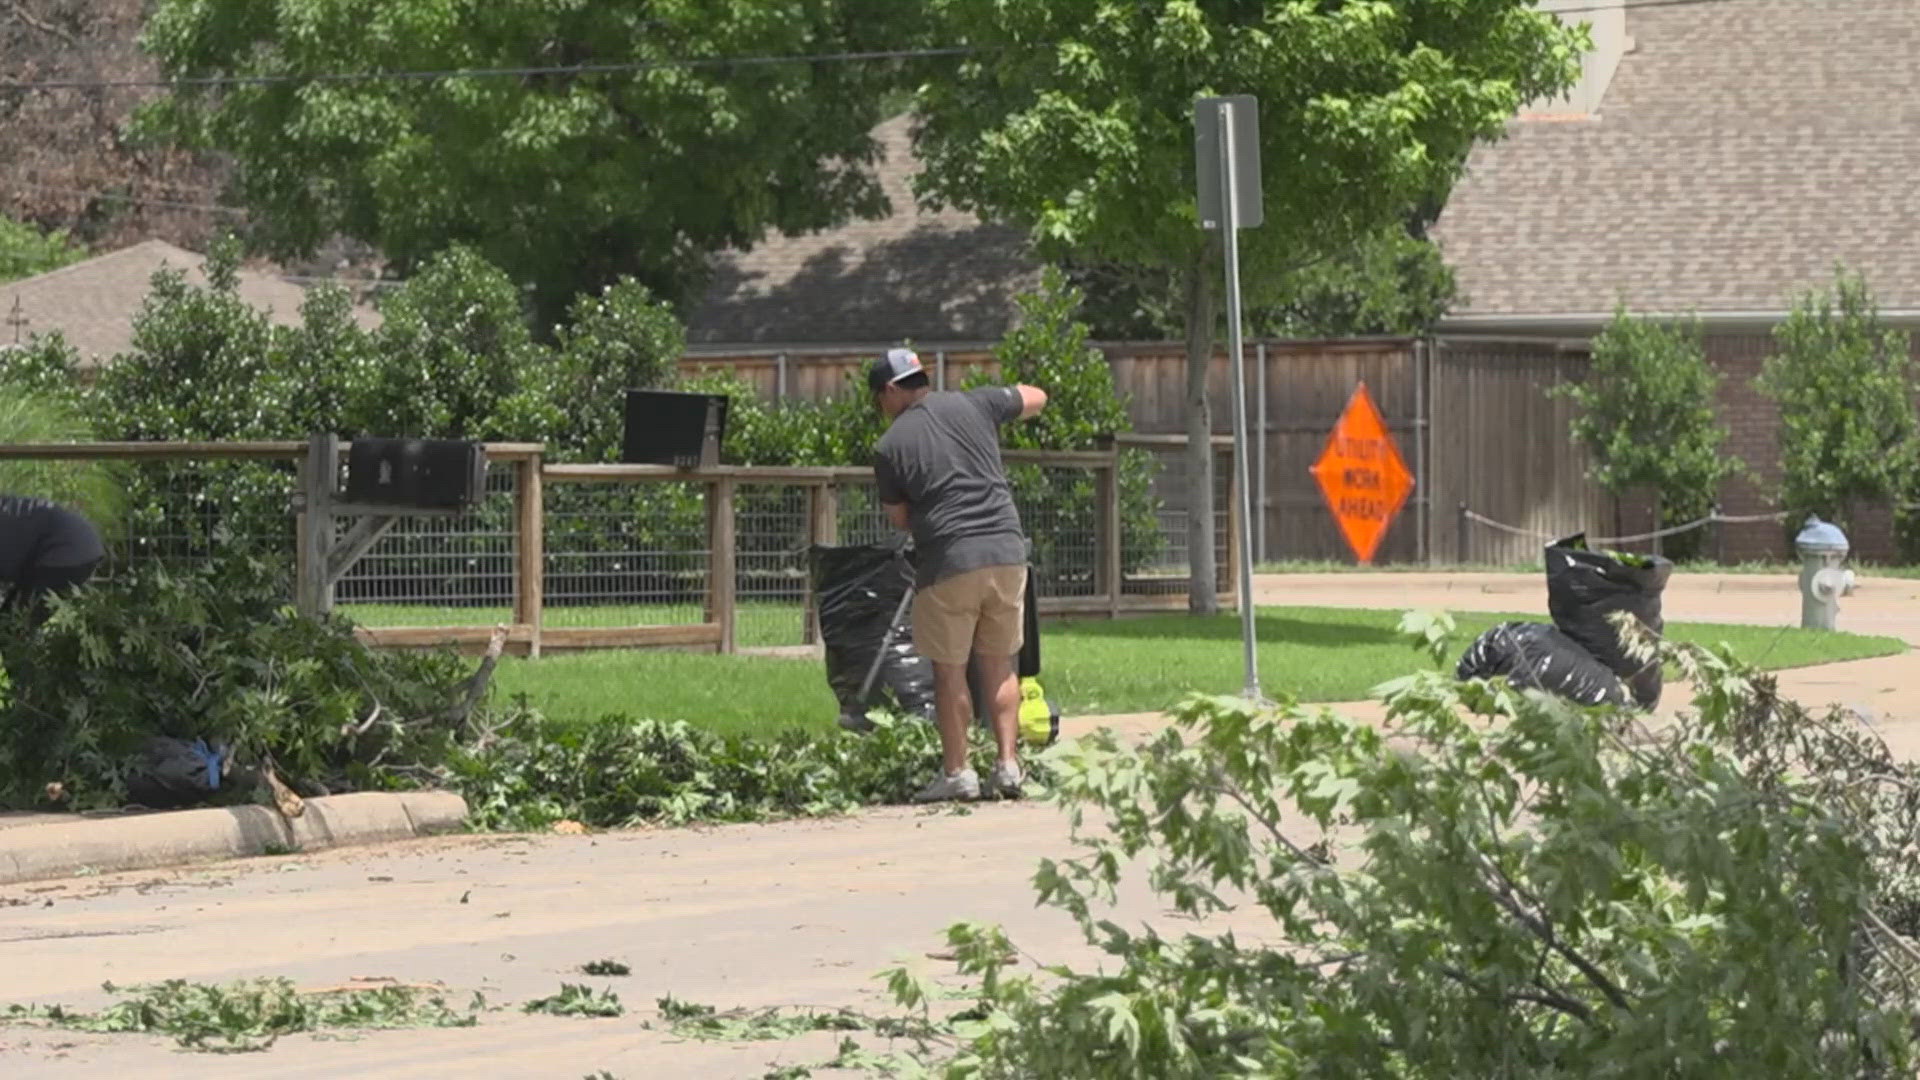 Storms Tuesday left damage and thousands without power across North Texas.